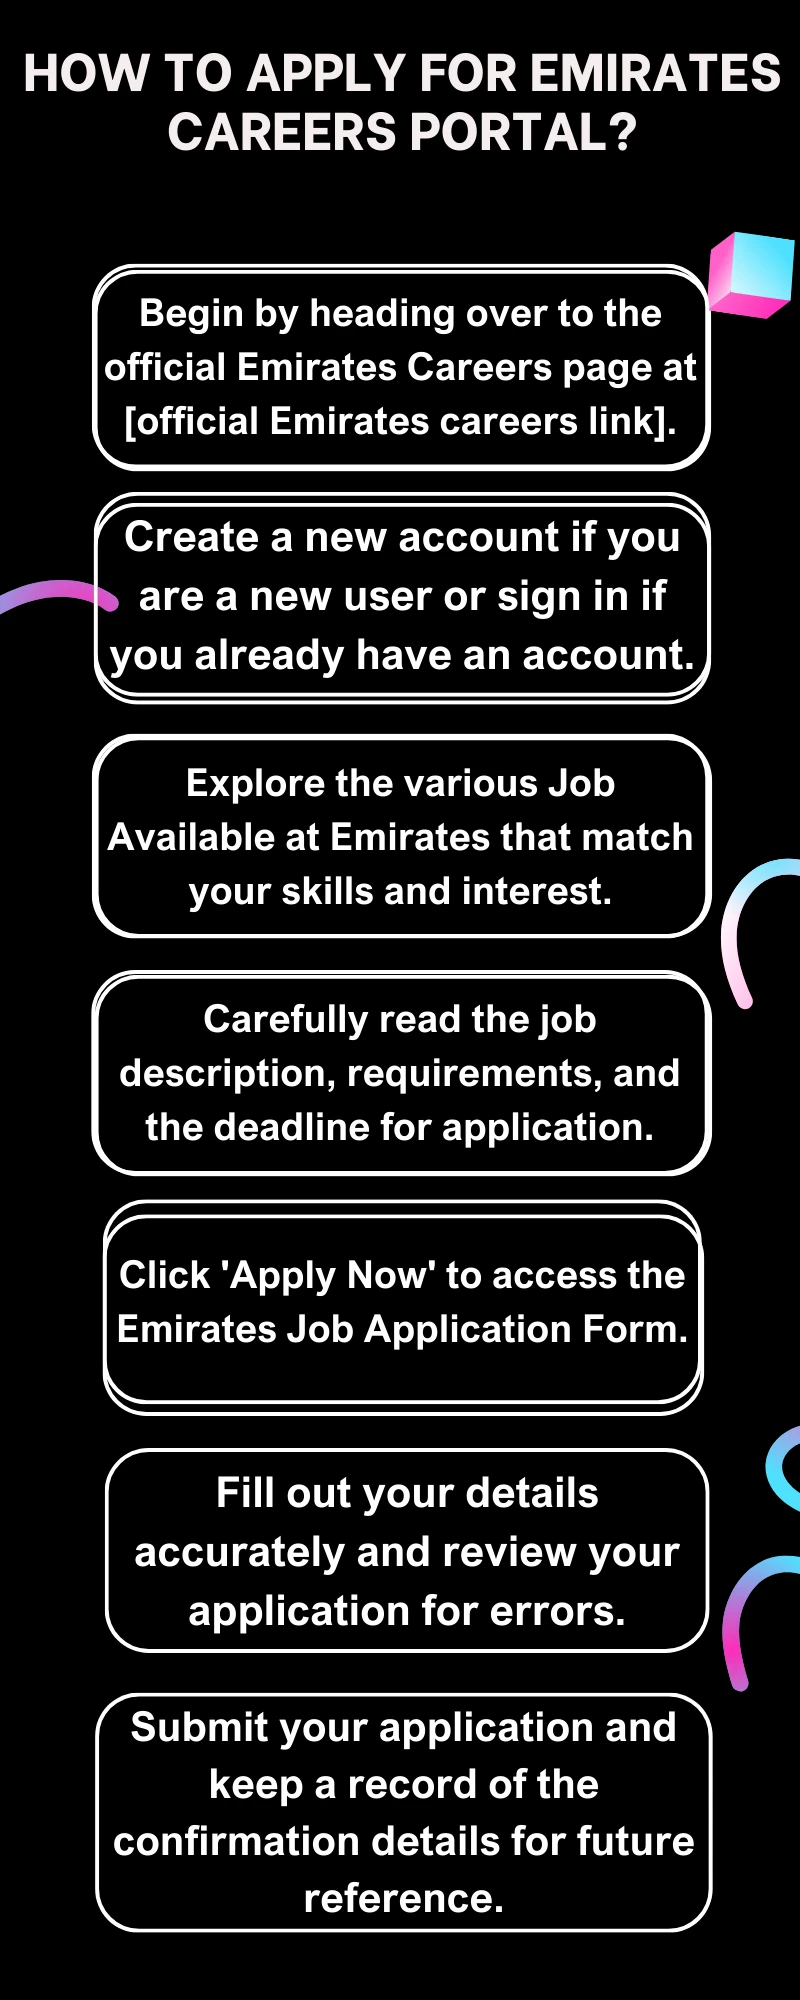 How To Apply for Emirates Careers Portal?